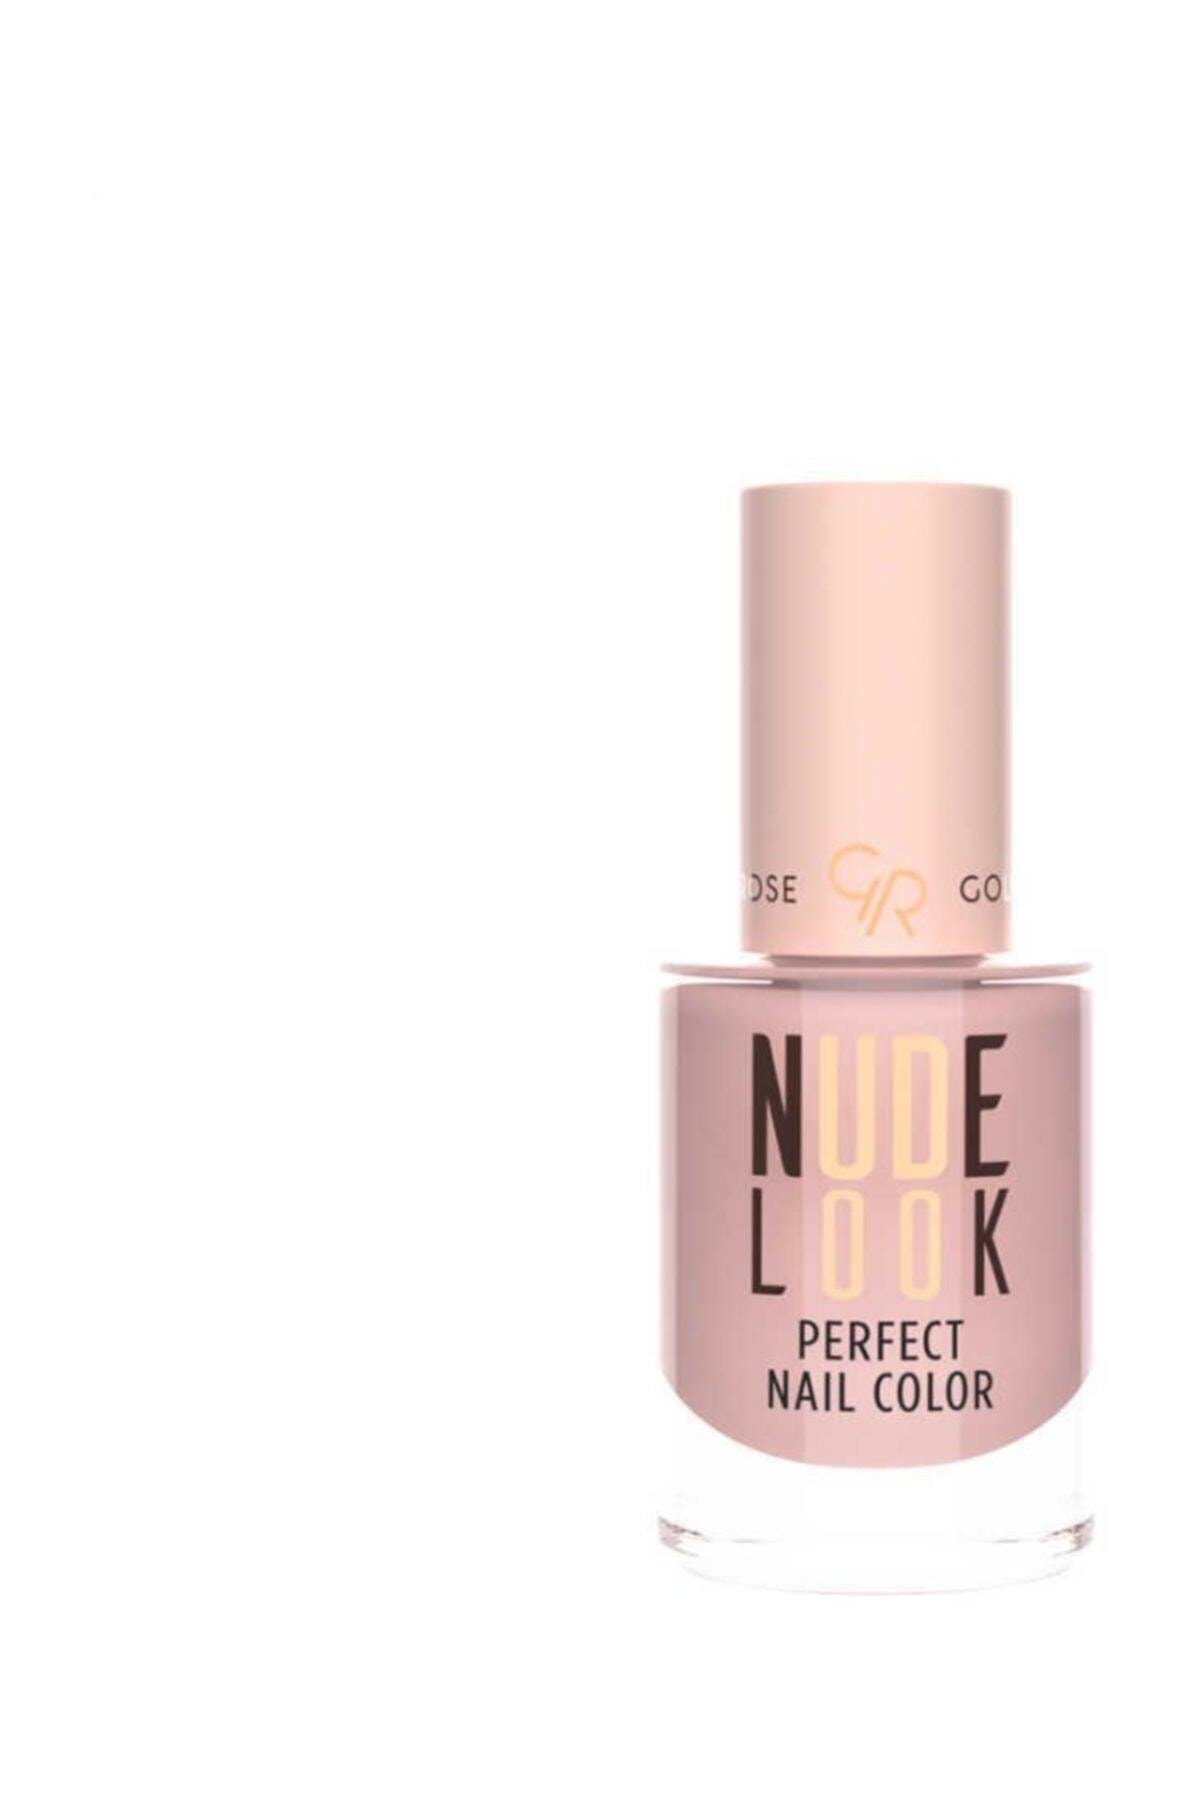 Golden Rose Nude Look Perfect Naıl Color - Oje 02